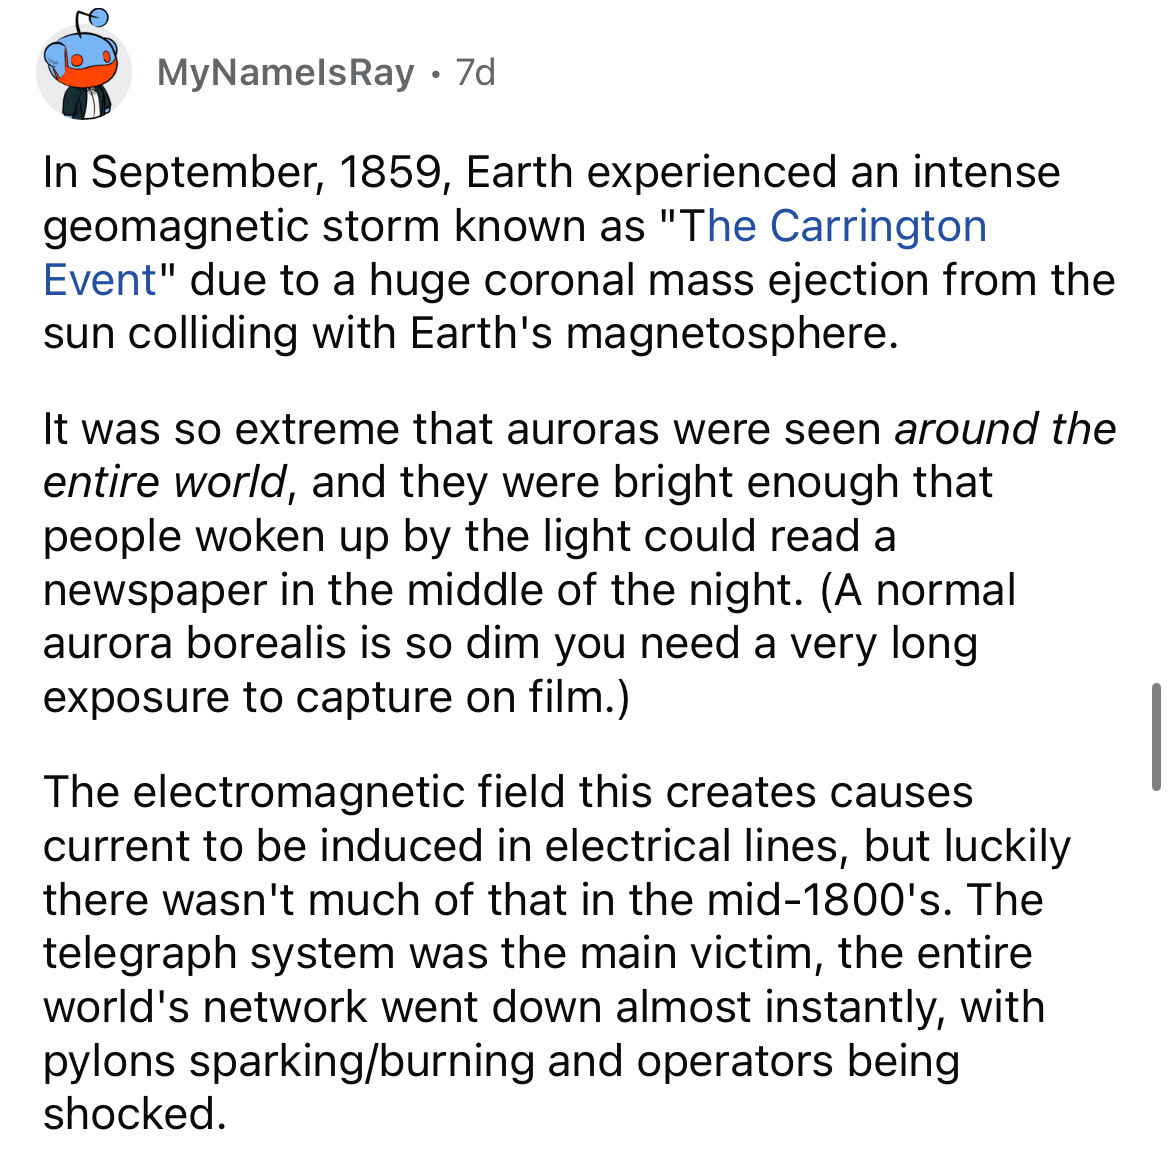 nanna gopala kannada notes - MyNamelsRay 7d In , Earth experienced an intense geomagnetic storm known as "The Carrington Event" due to a huge coronal mass ejection from the sun colliding with Earth's magnetosphere. It was so extreme that auroras were seen